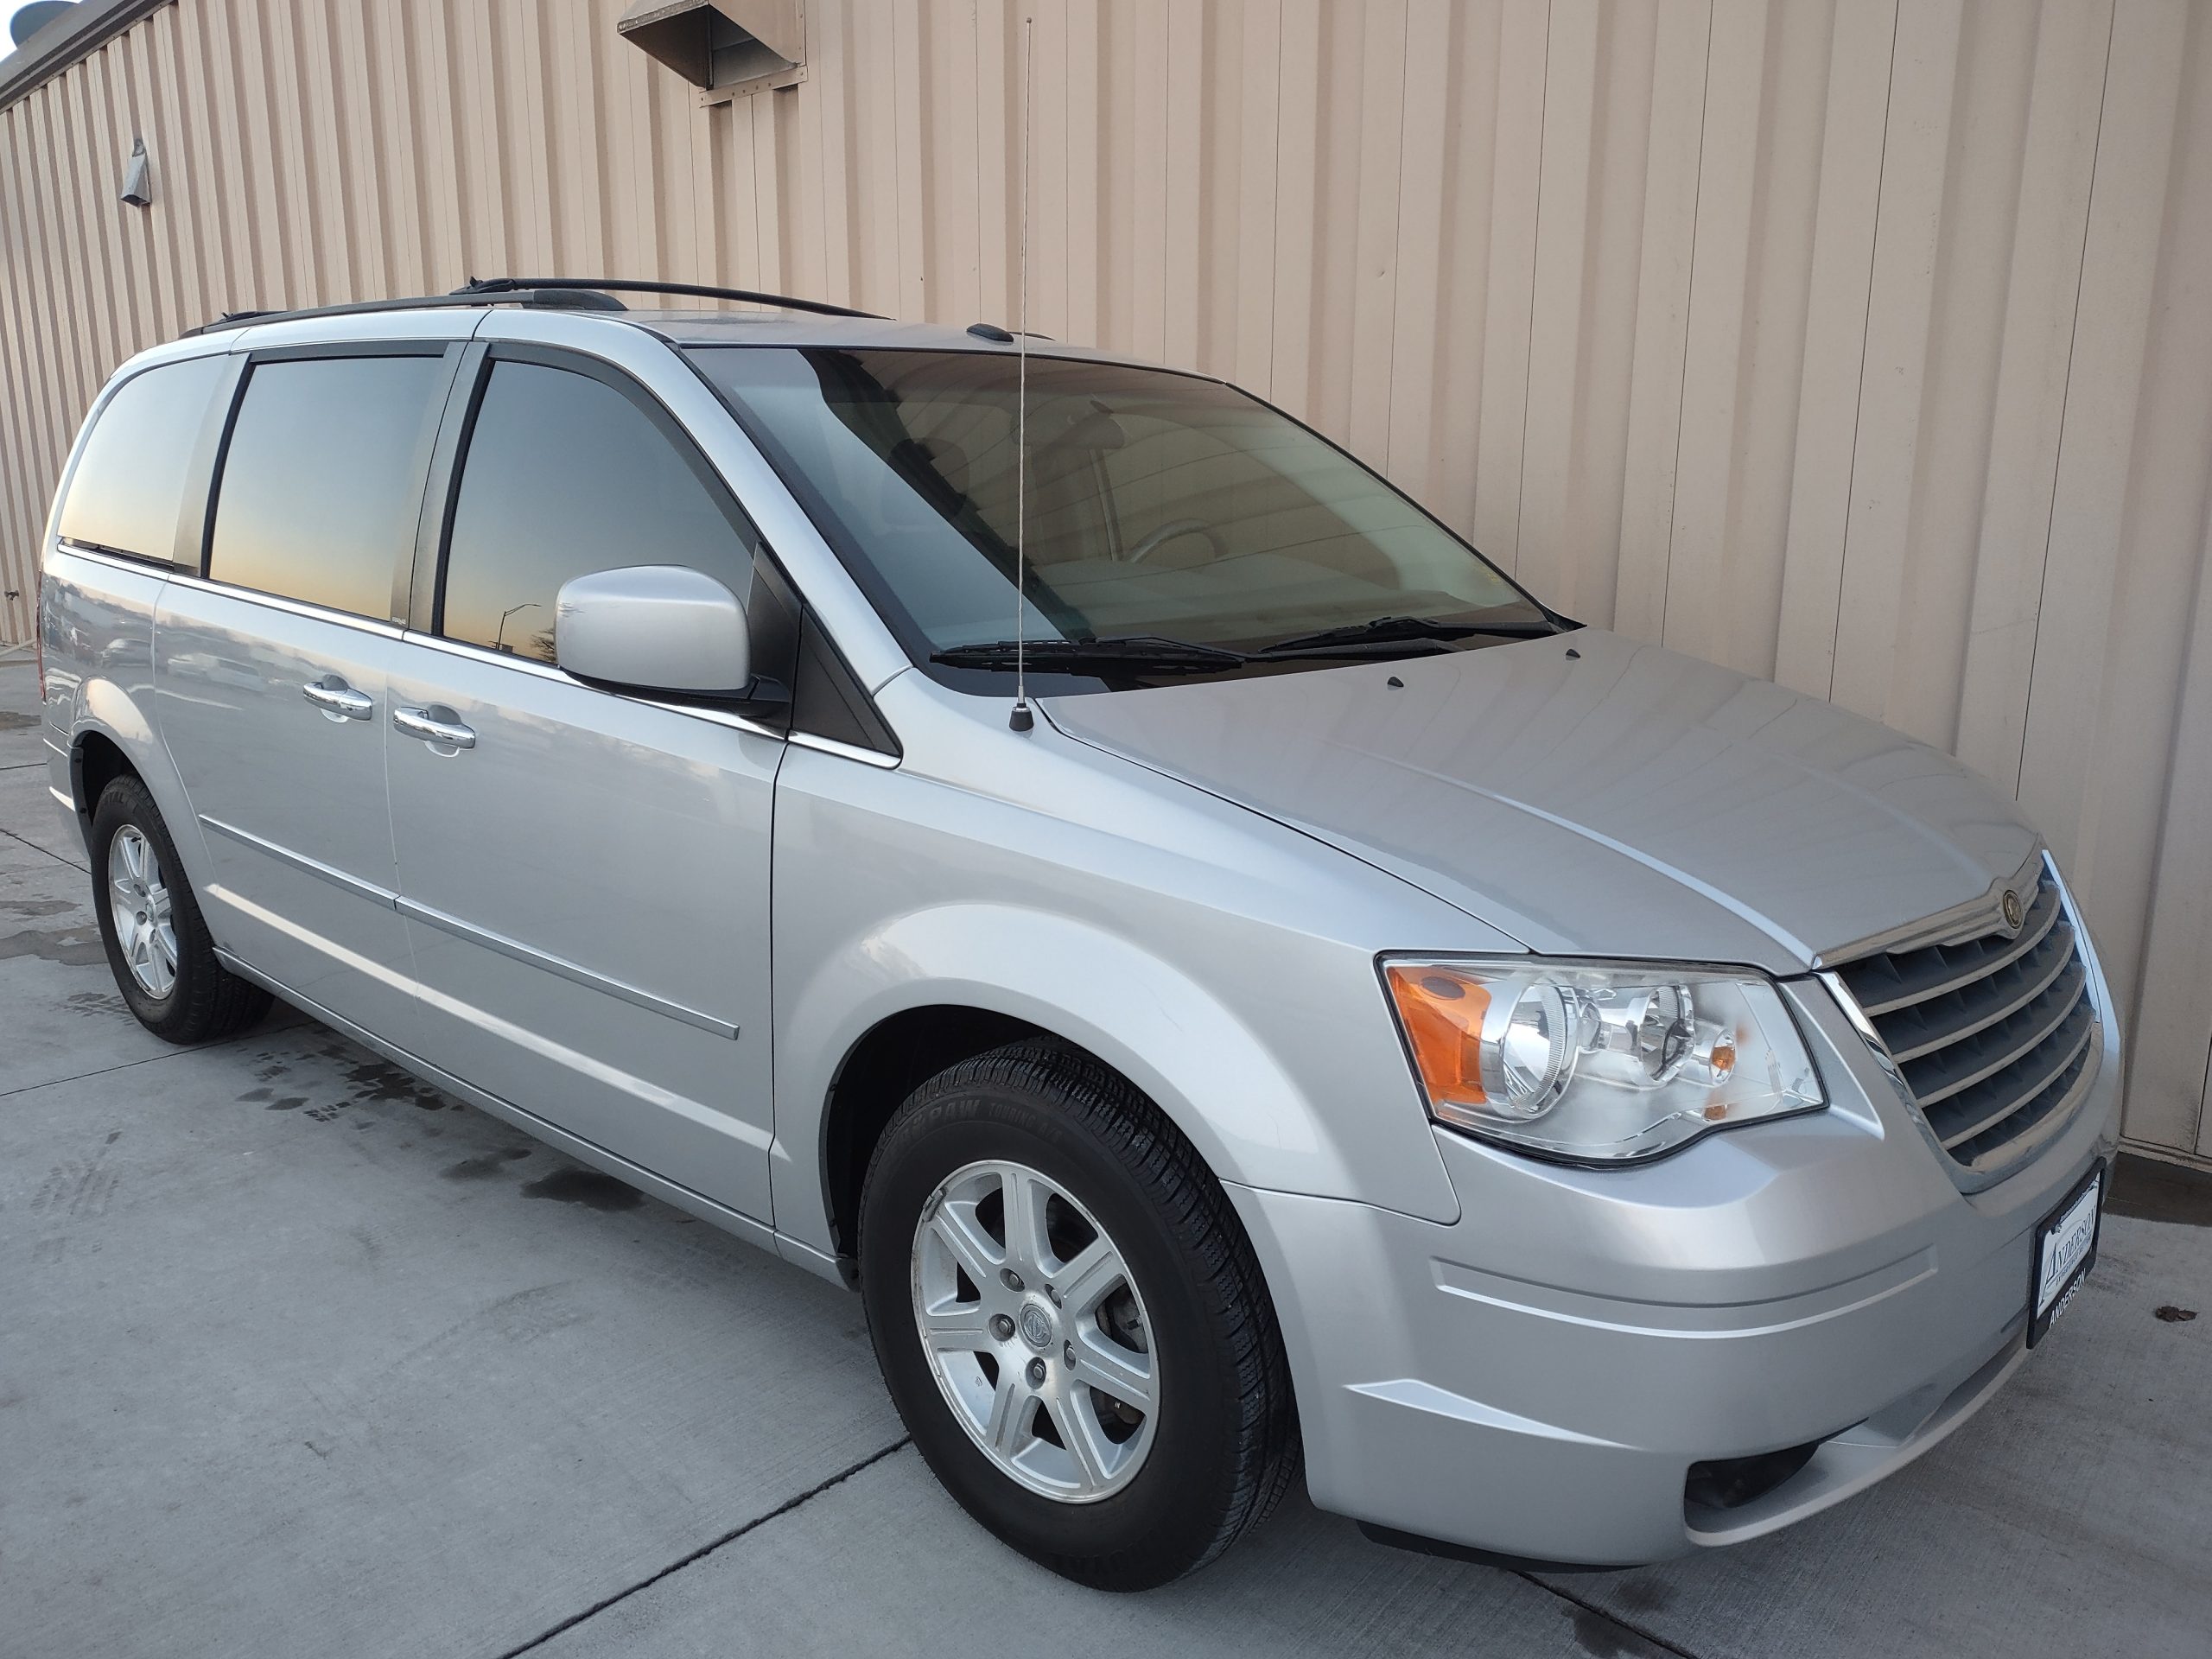 Used 2009 Chrysler Town & Country Touring Minivan for sale in 